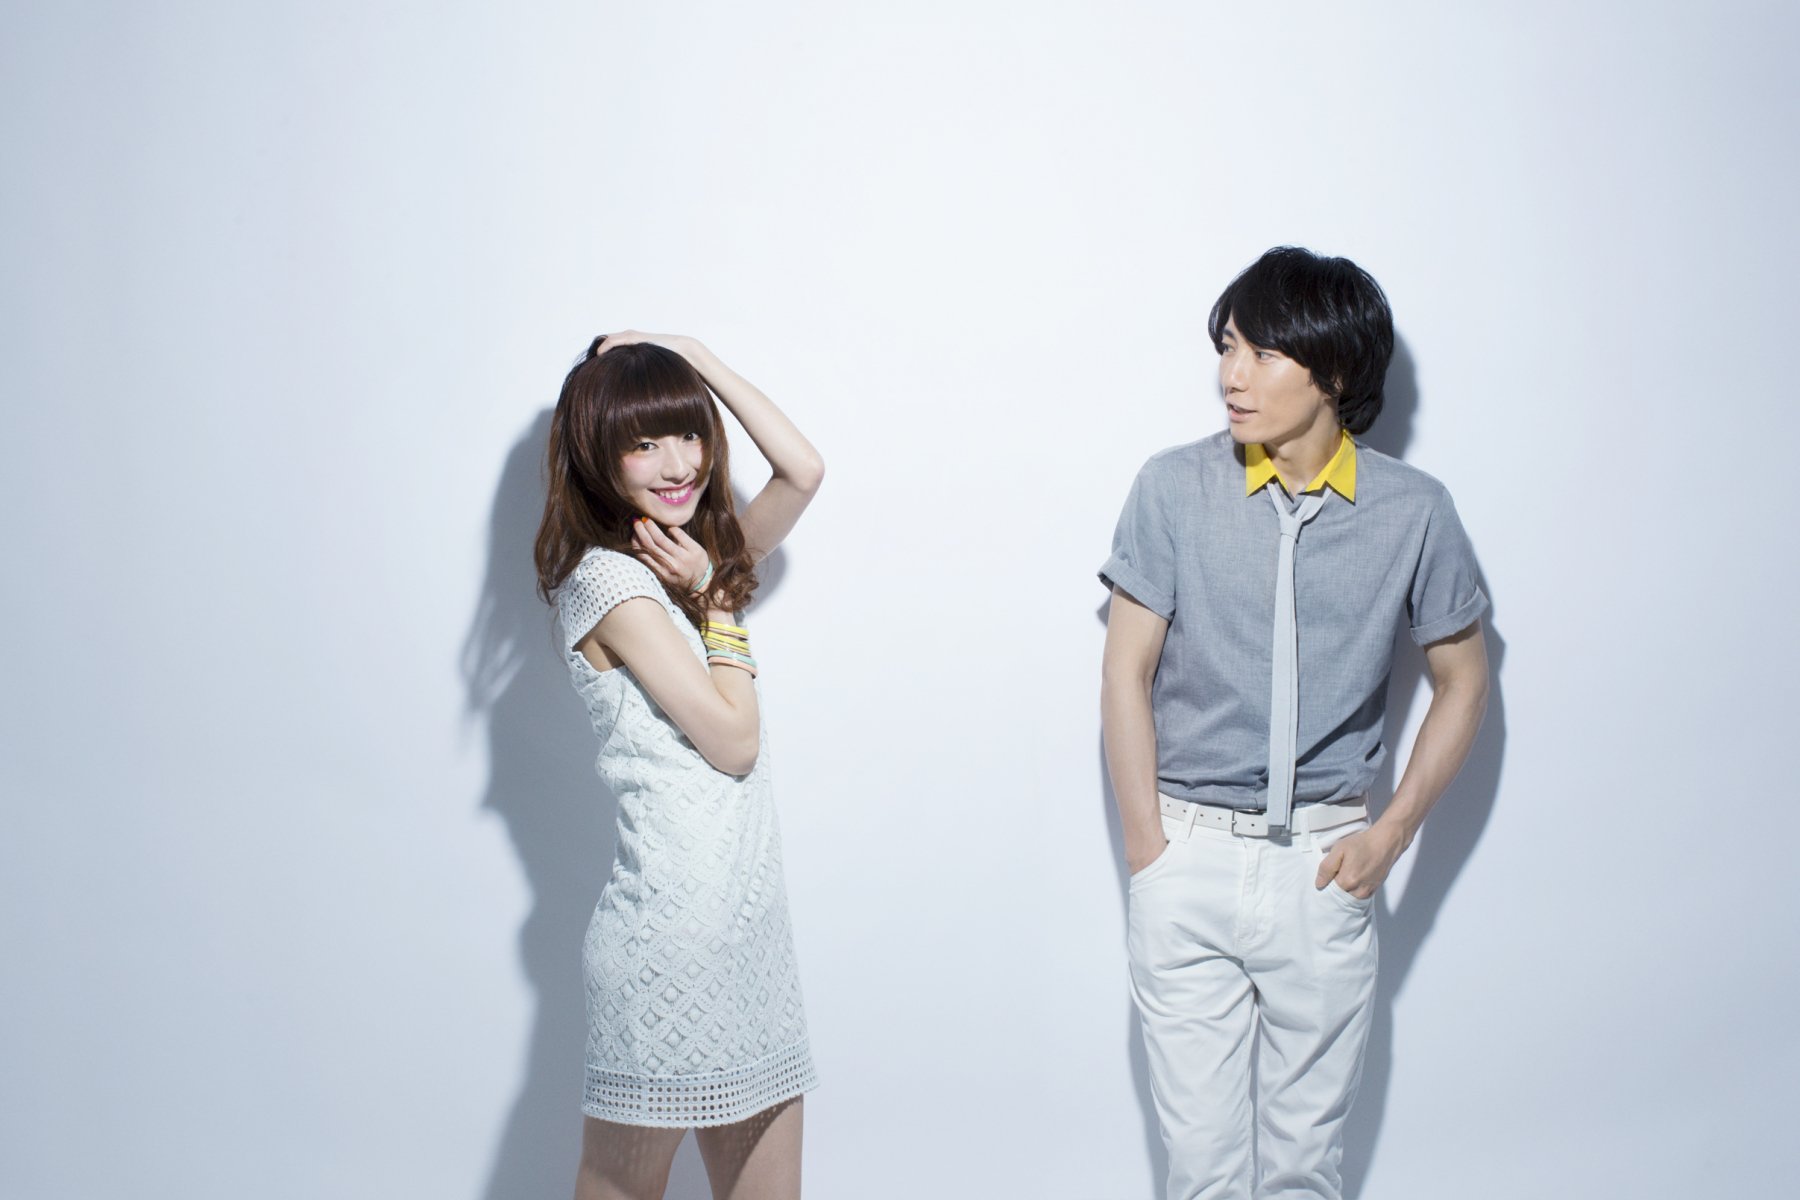 moumoon’s New Single “Hello, shooting-star” to be Used as ED theme song of “Assassination Classroom”